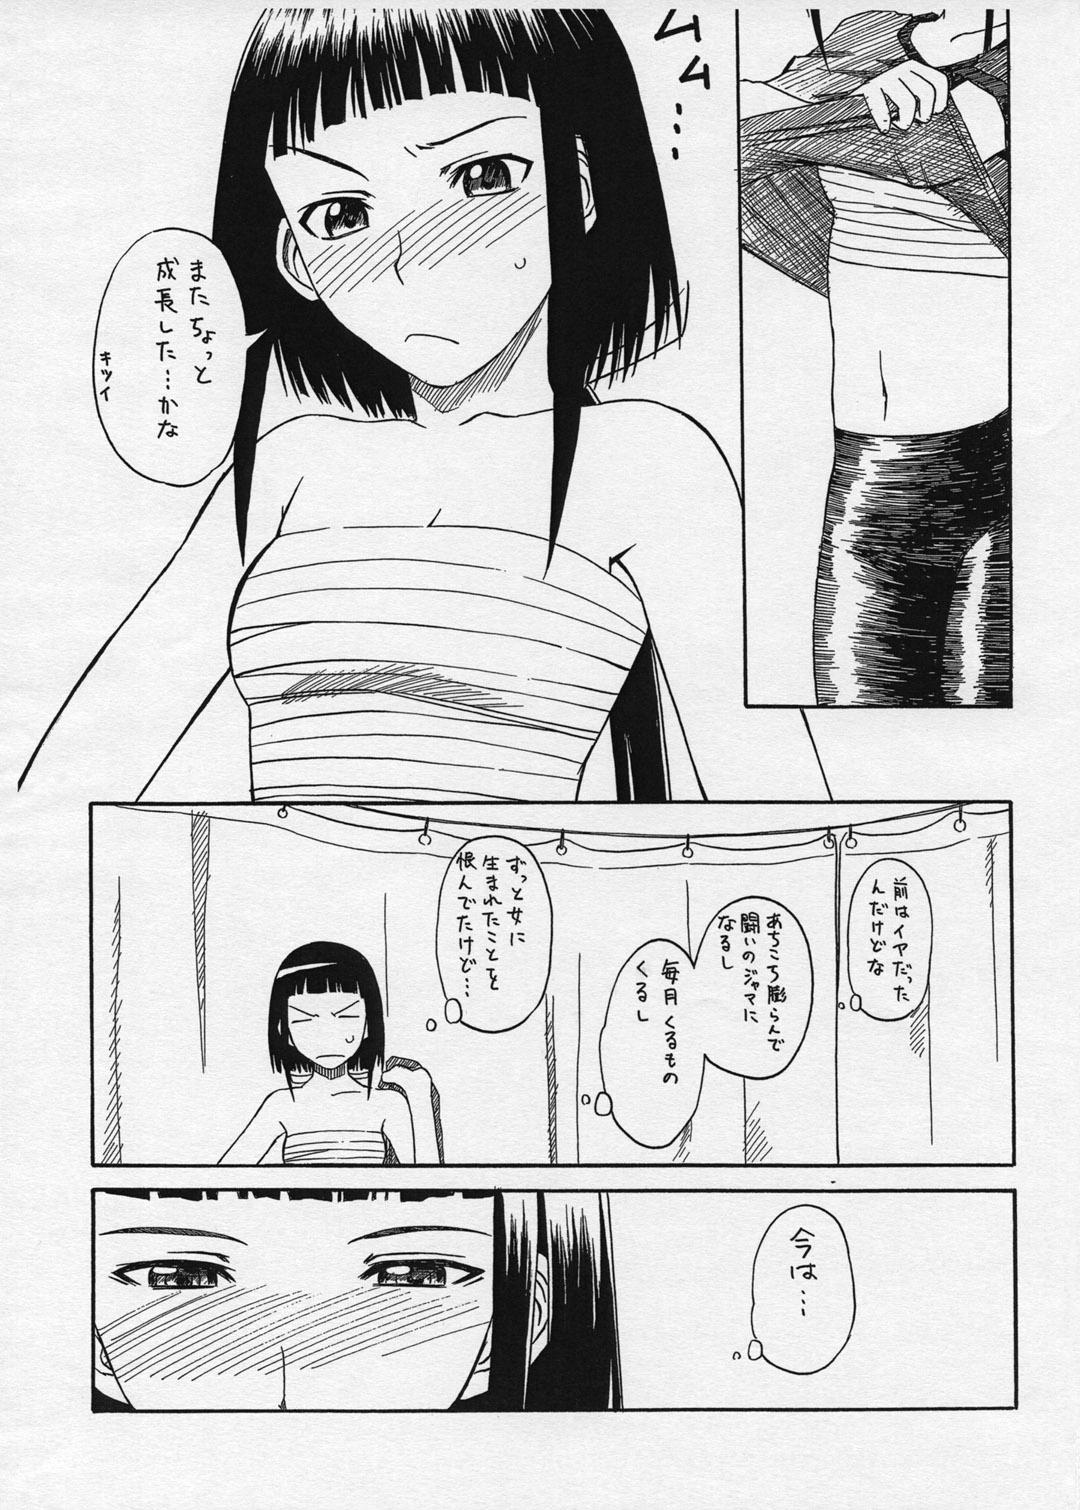 Buttplug Omake PRETTY NEIGHBOR &! Vol.3 - Mai-hime Punished - Page 2